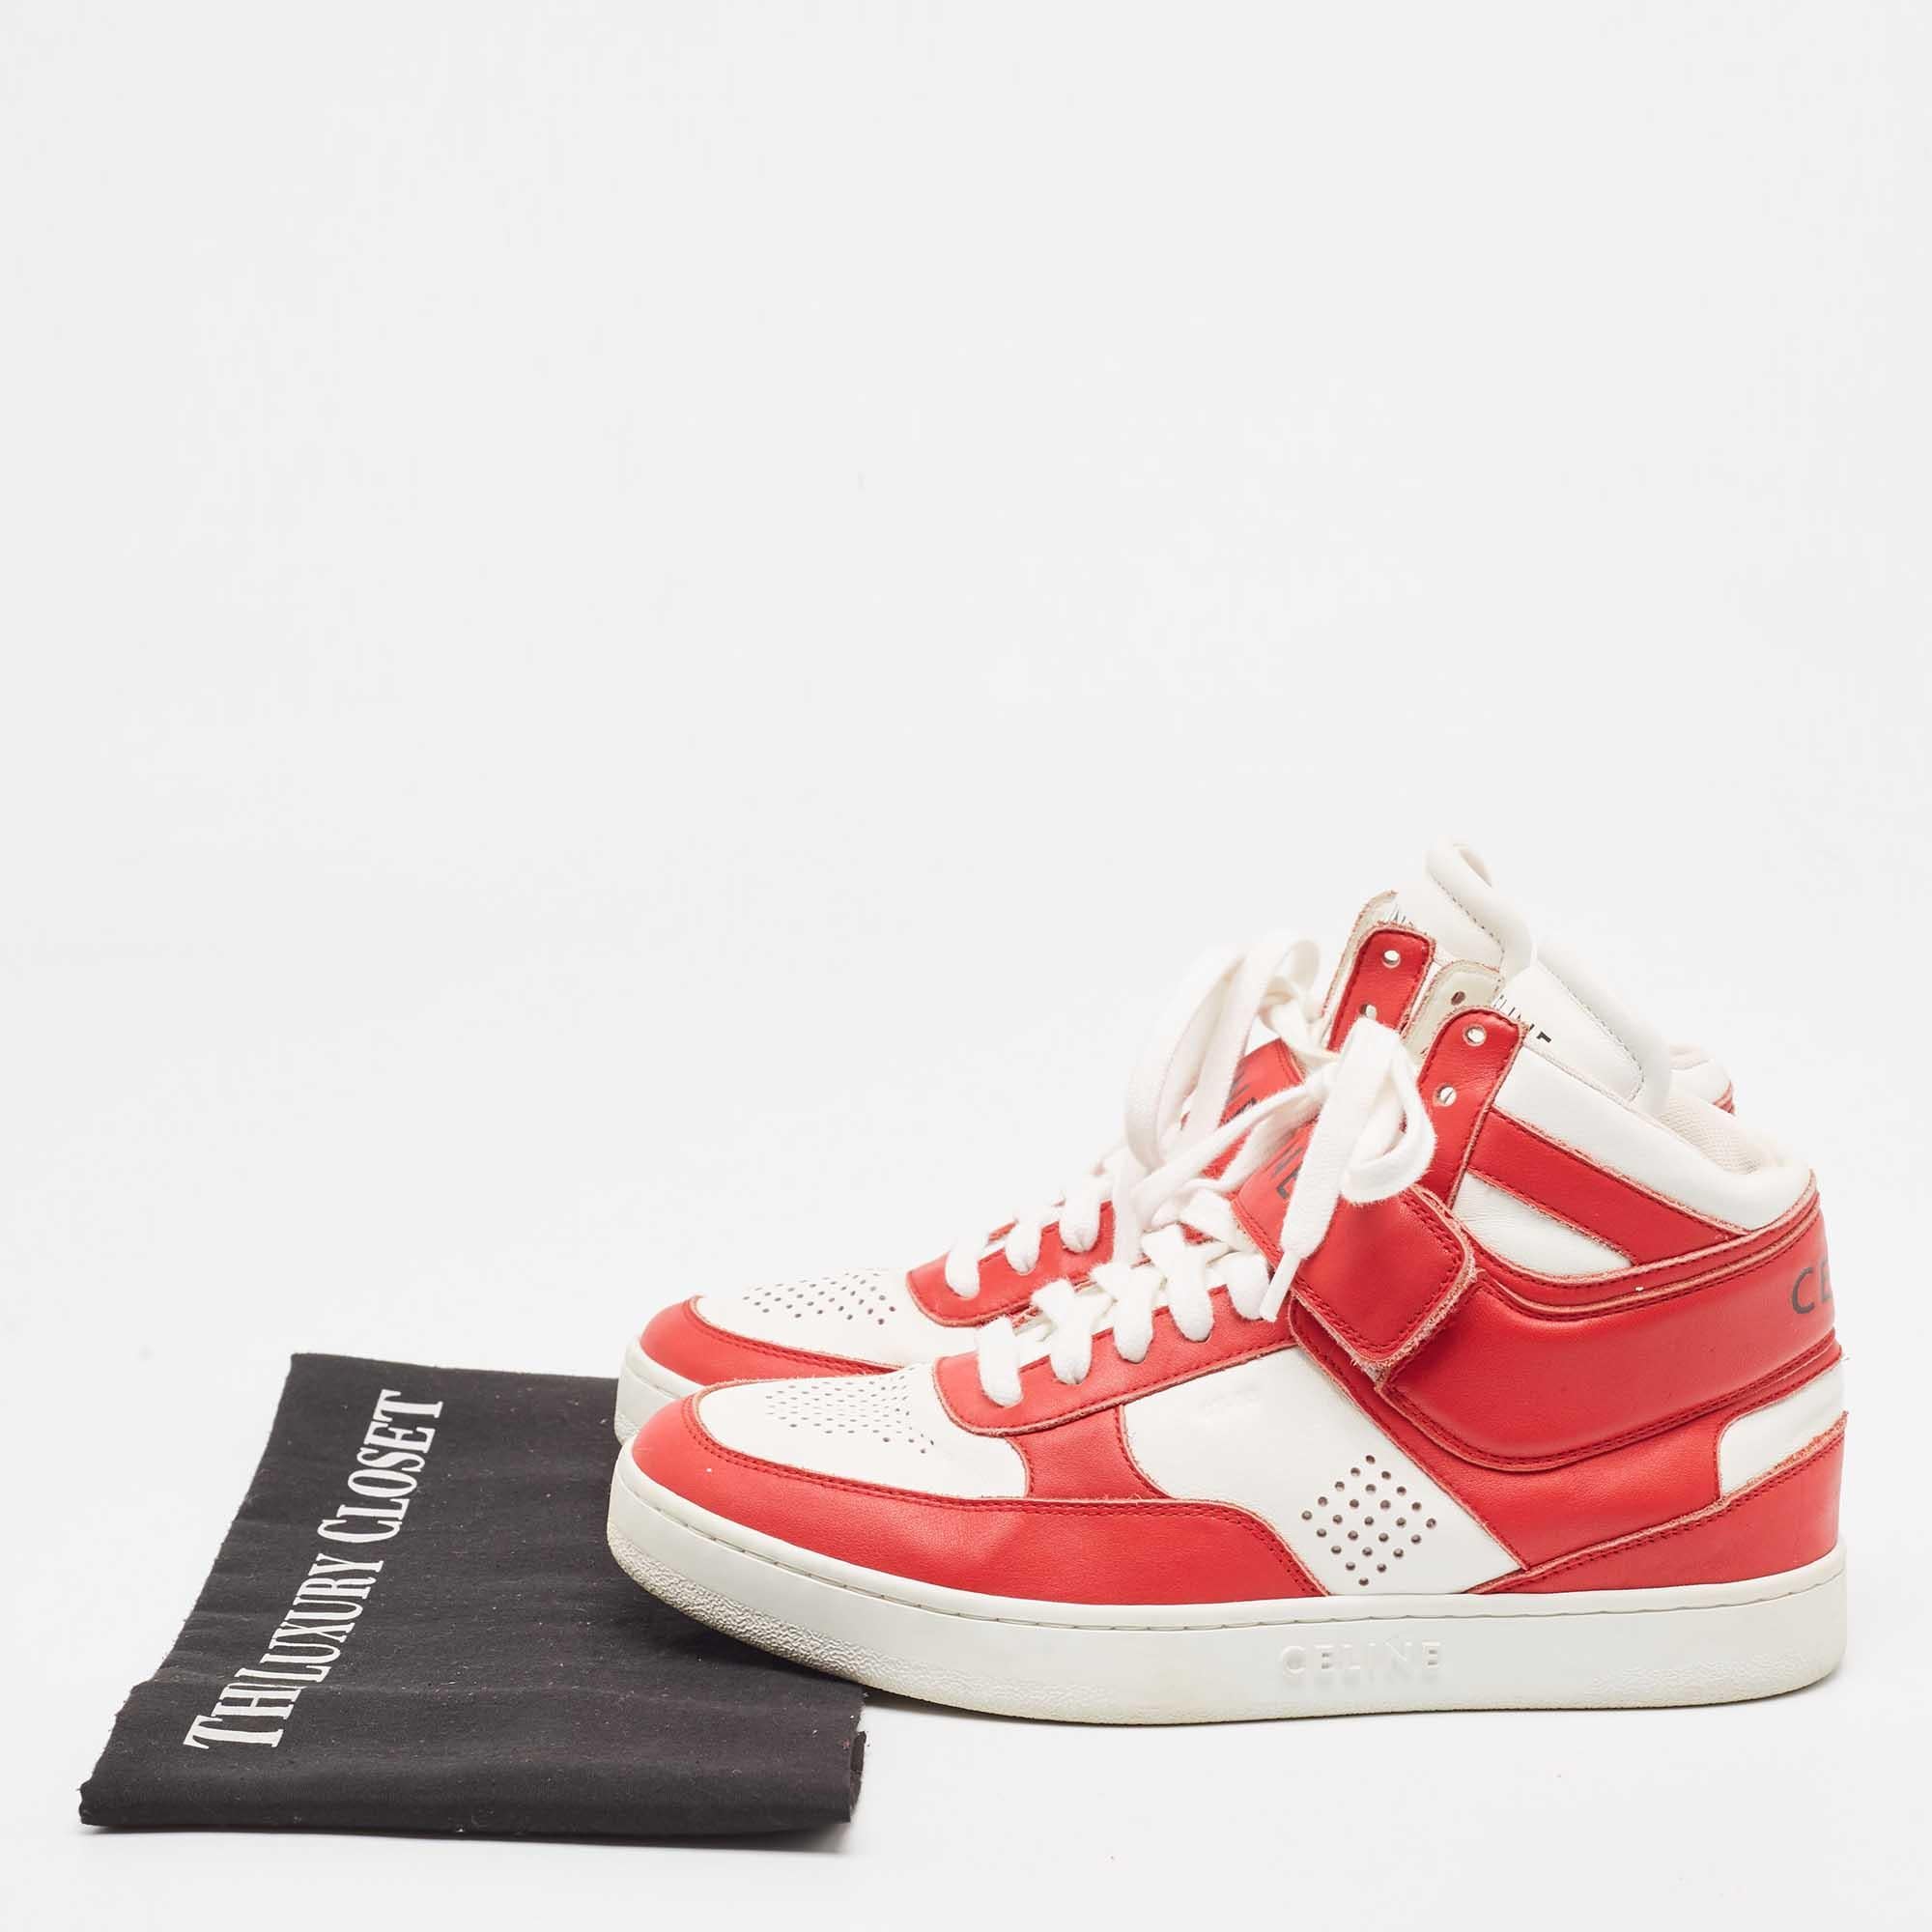 Celine Red/White Leather High Top Sneakers Size 38 For Sale 4